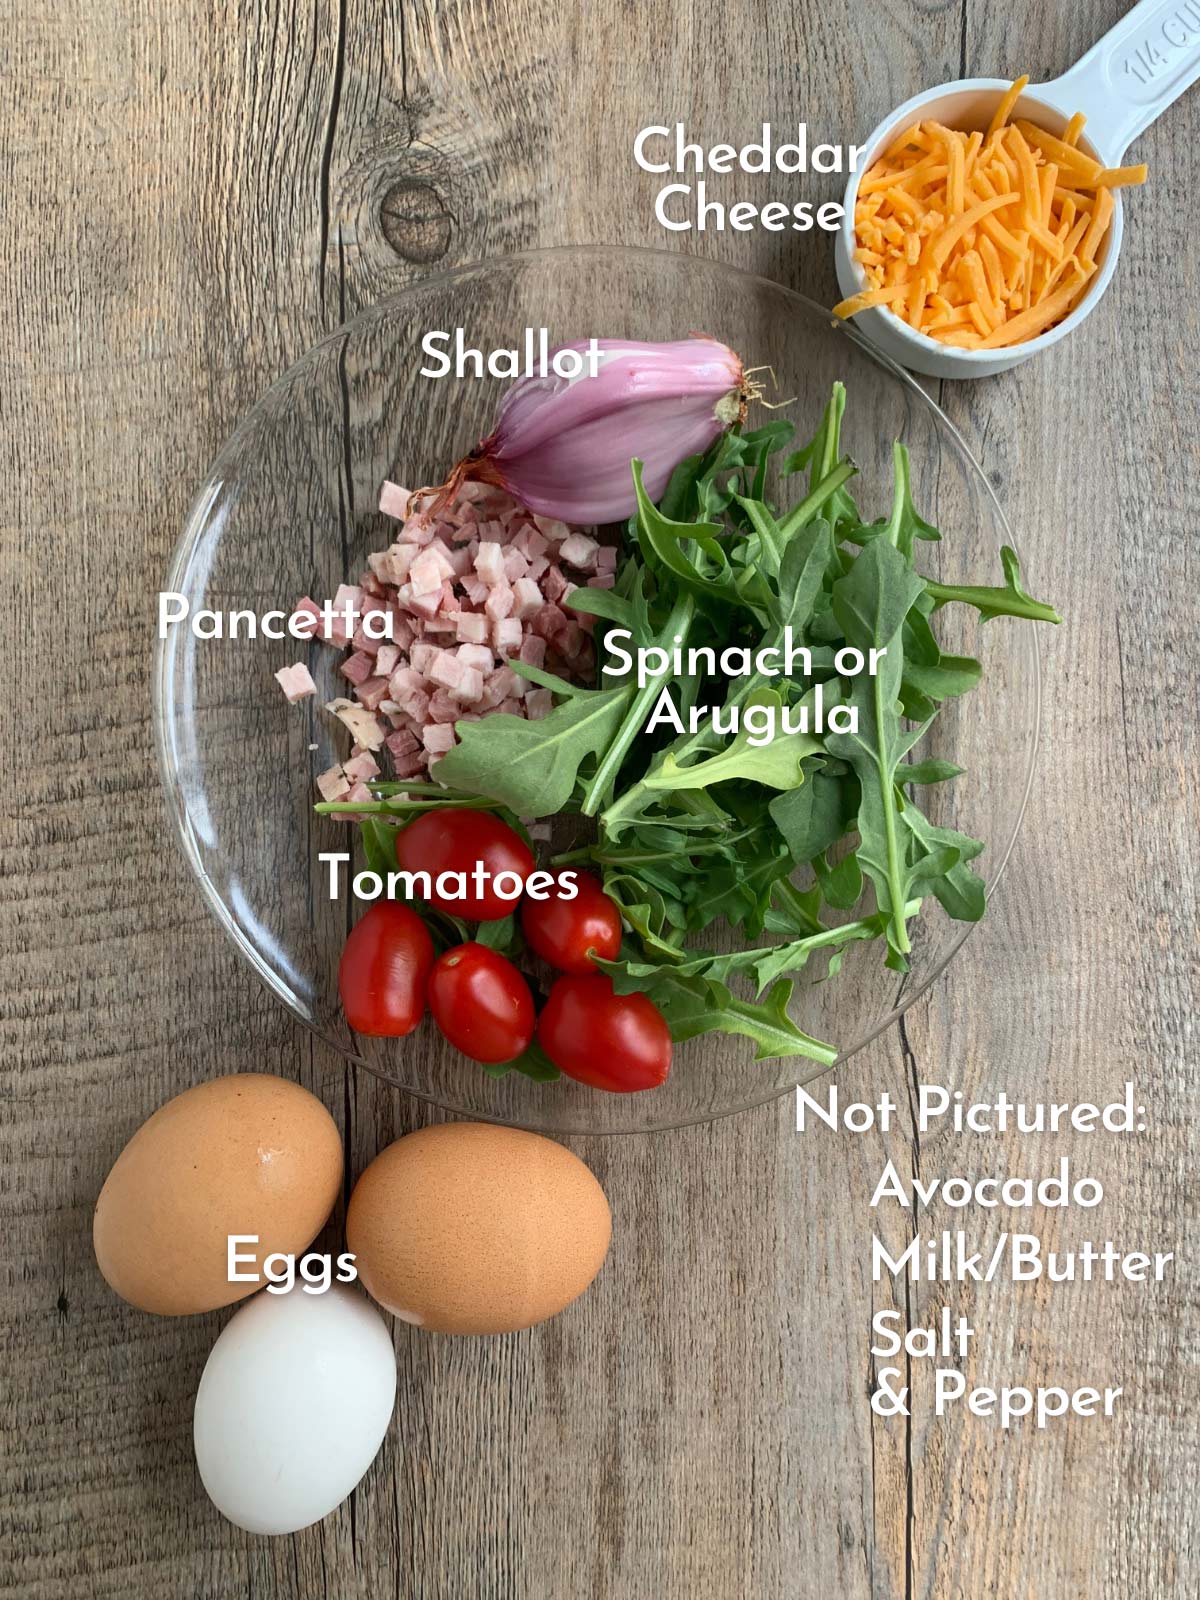 Ingredients for omelette in a glass bowl and on wooden board with text captions on each.